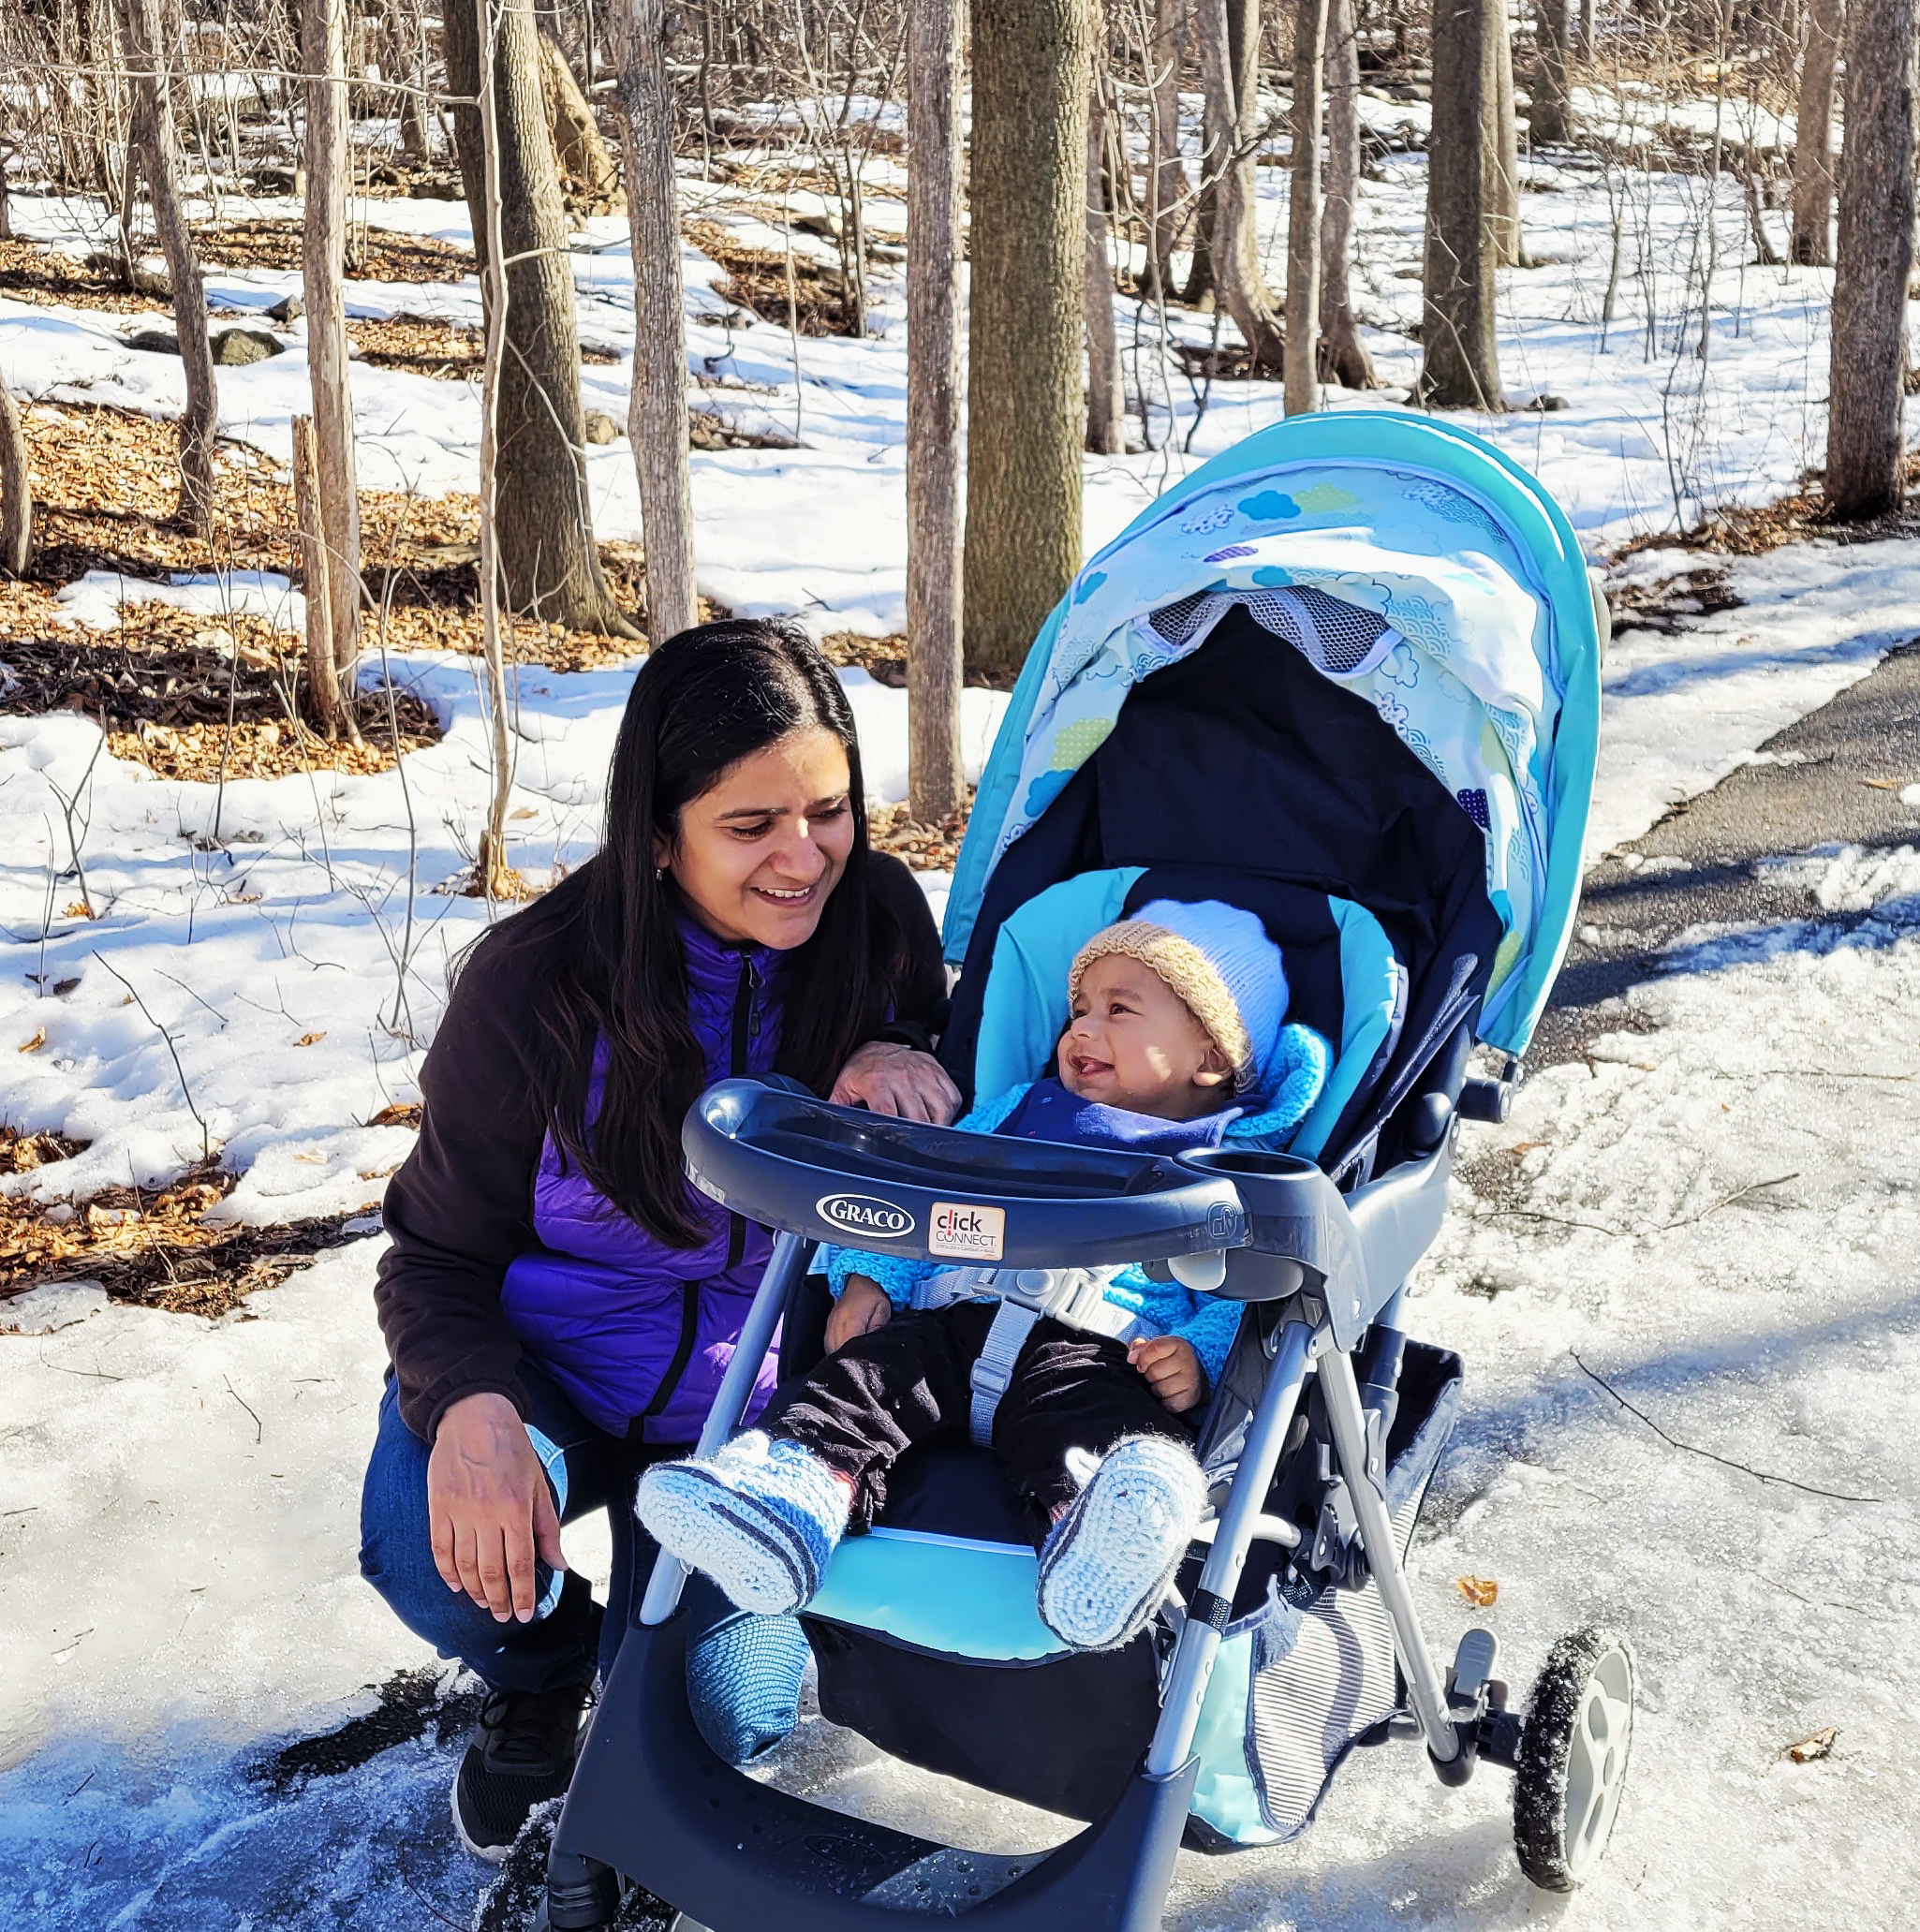 Prachi and her baby on a snowy trail